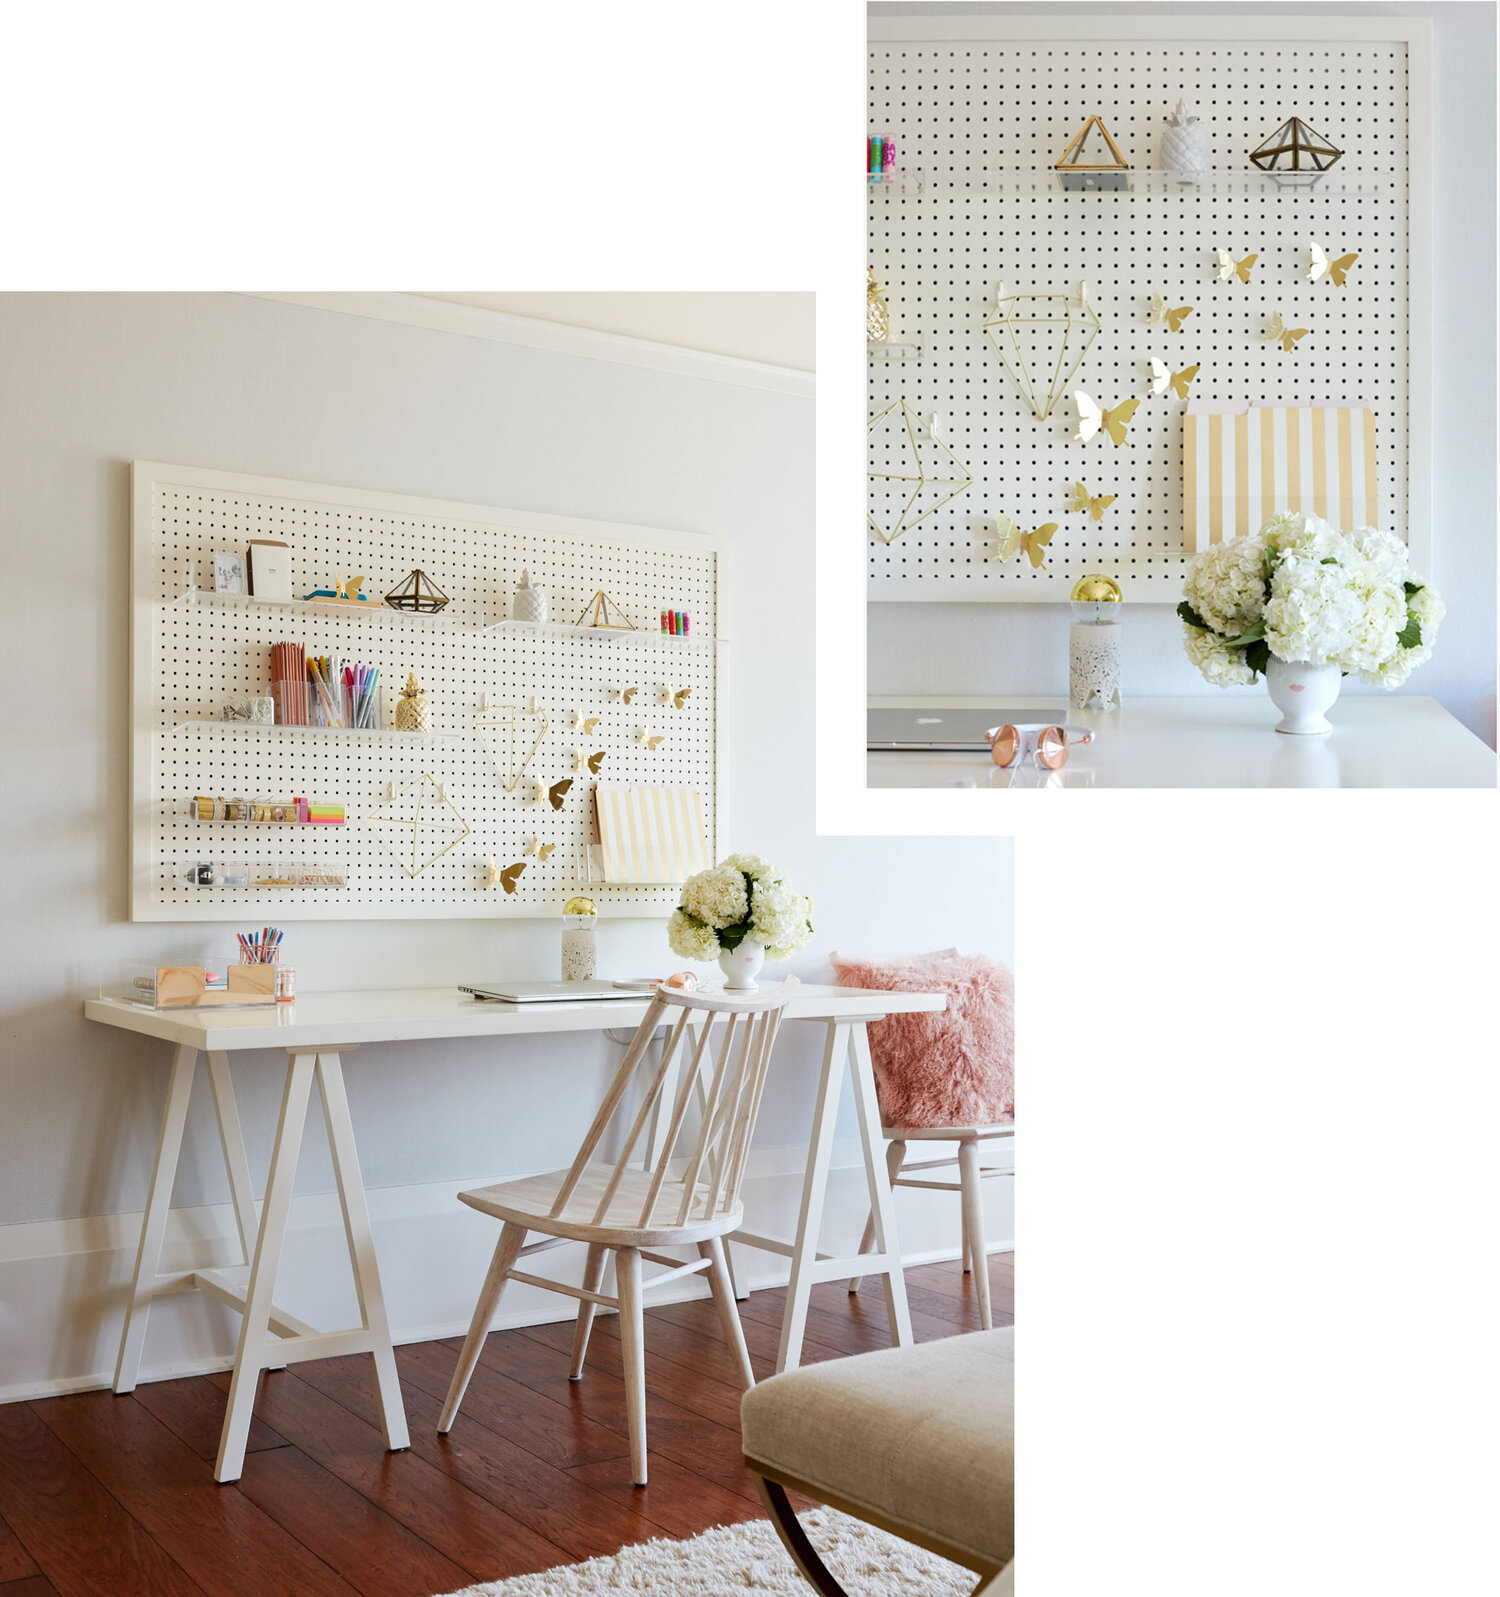 Two images showing a craft corner with a punchboard.